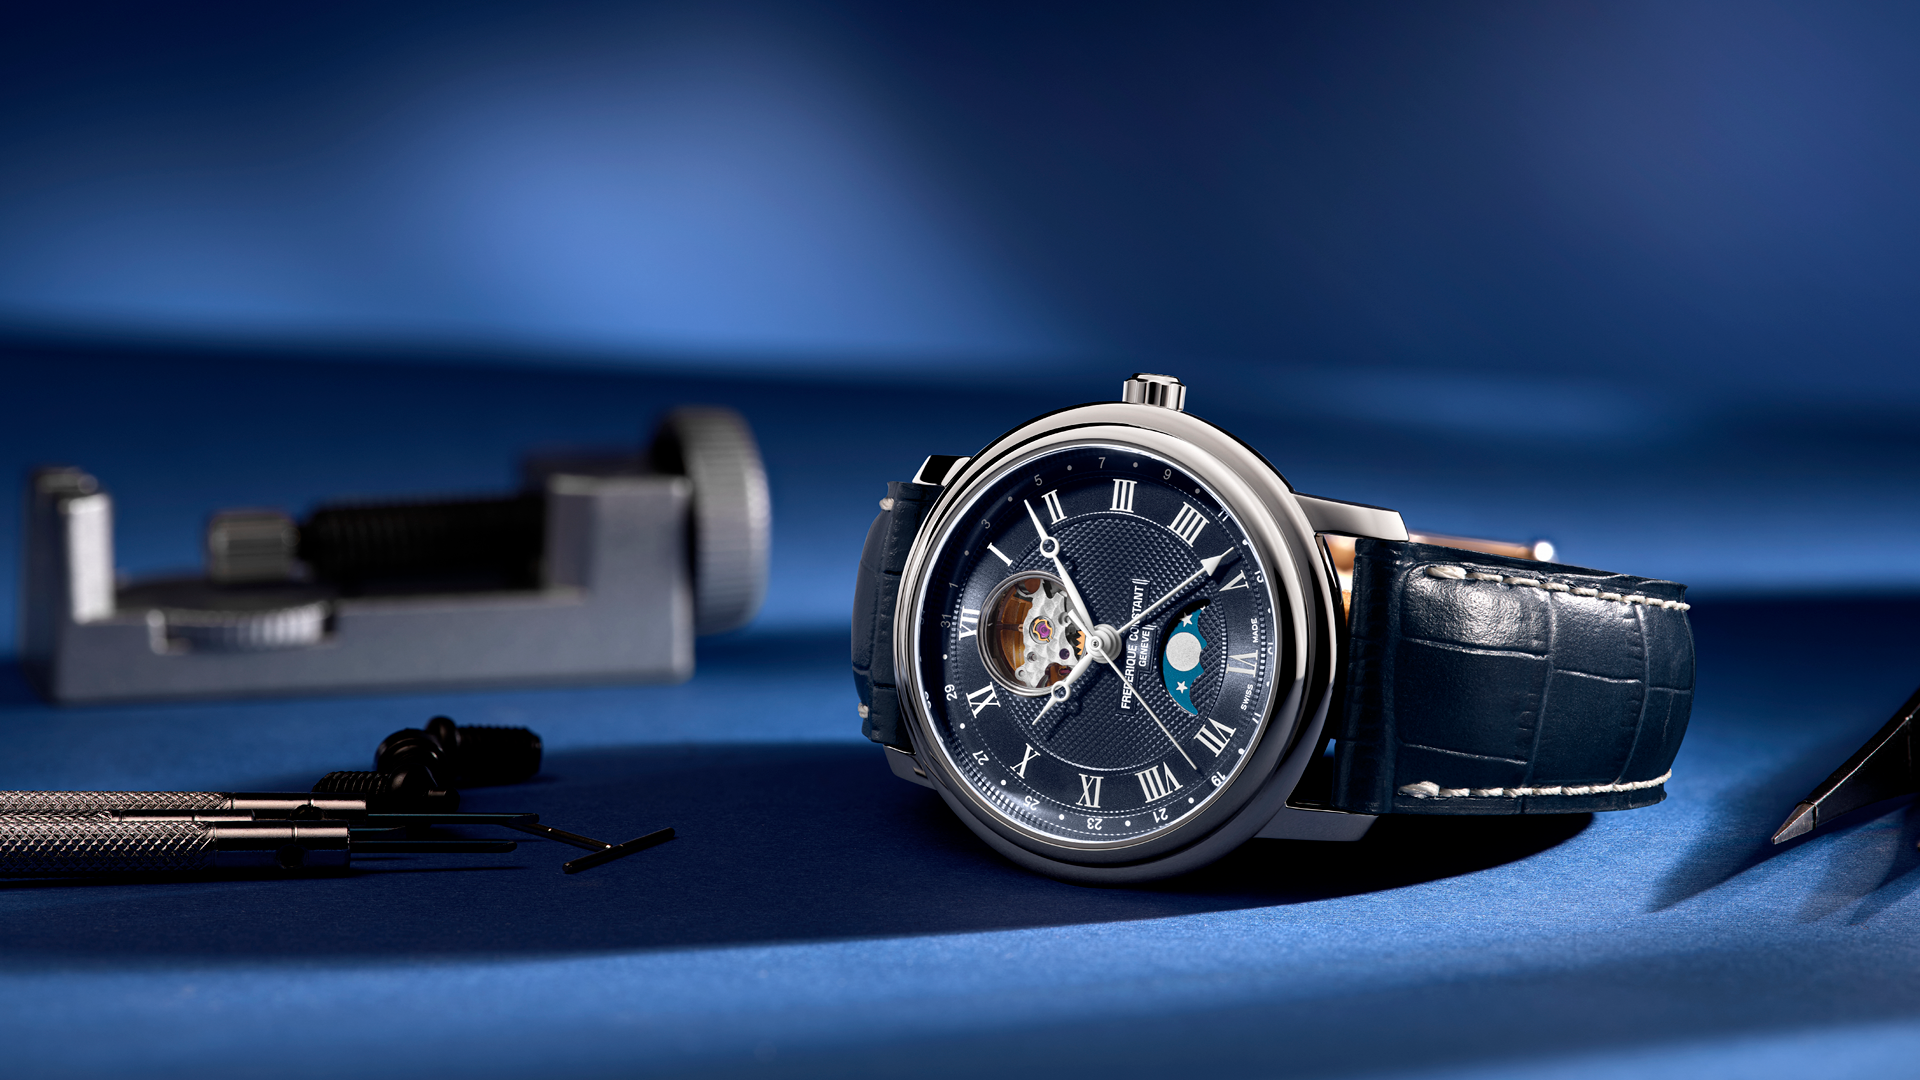 Classic Heart Beat Moonphase Date watch for man. Automatic movement, blue dial, stainless-steel case, heart beat opening, moonphase and blue leather strap